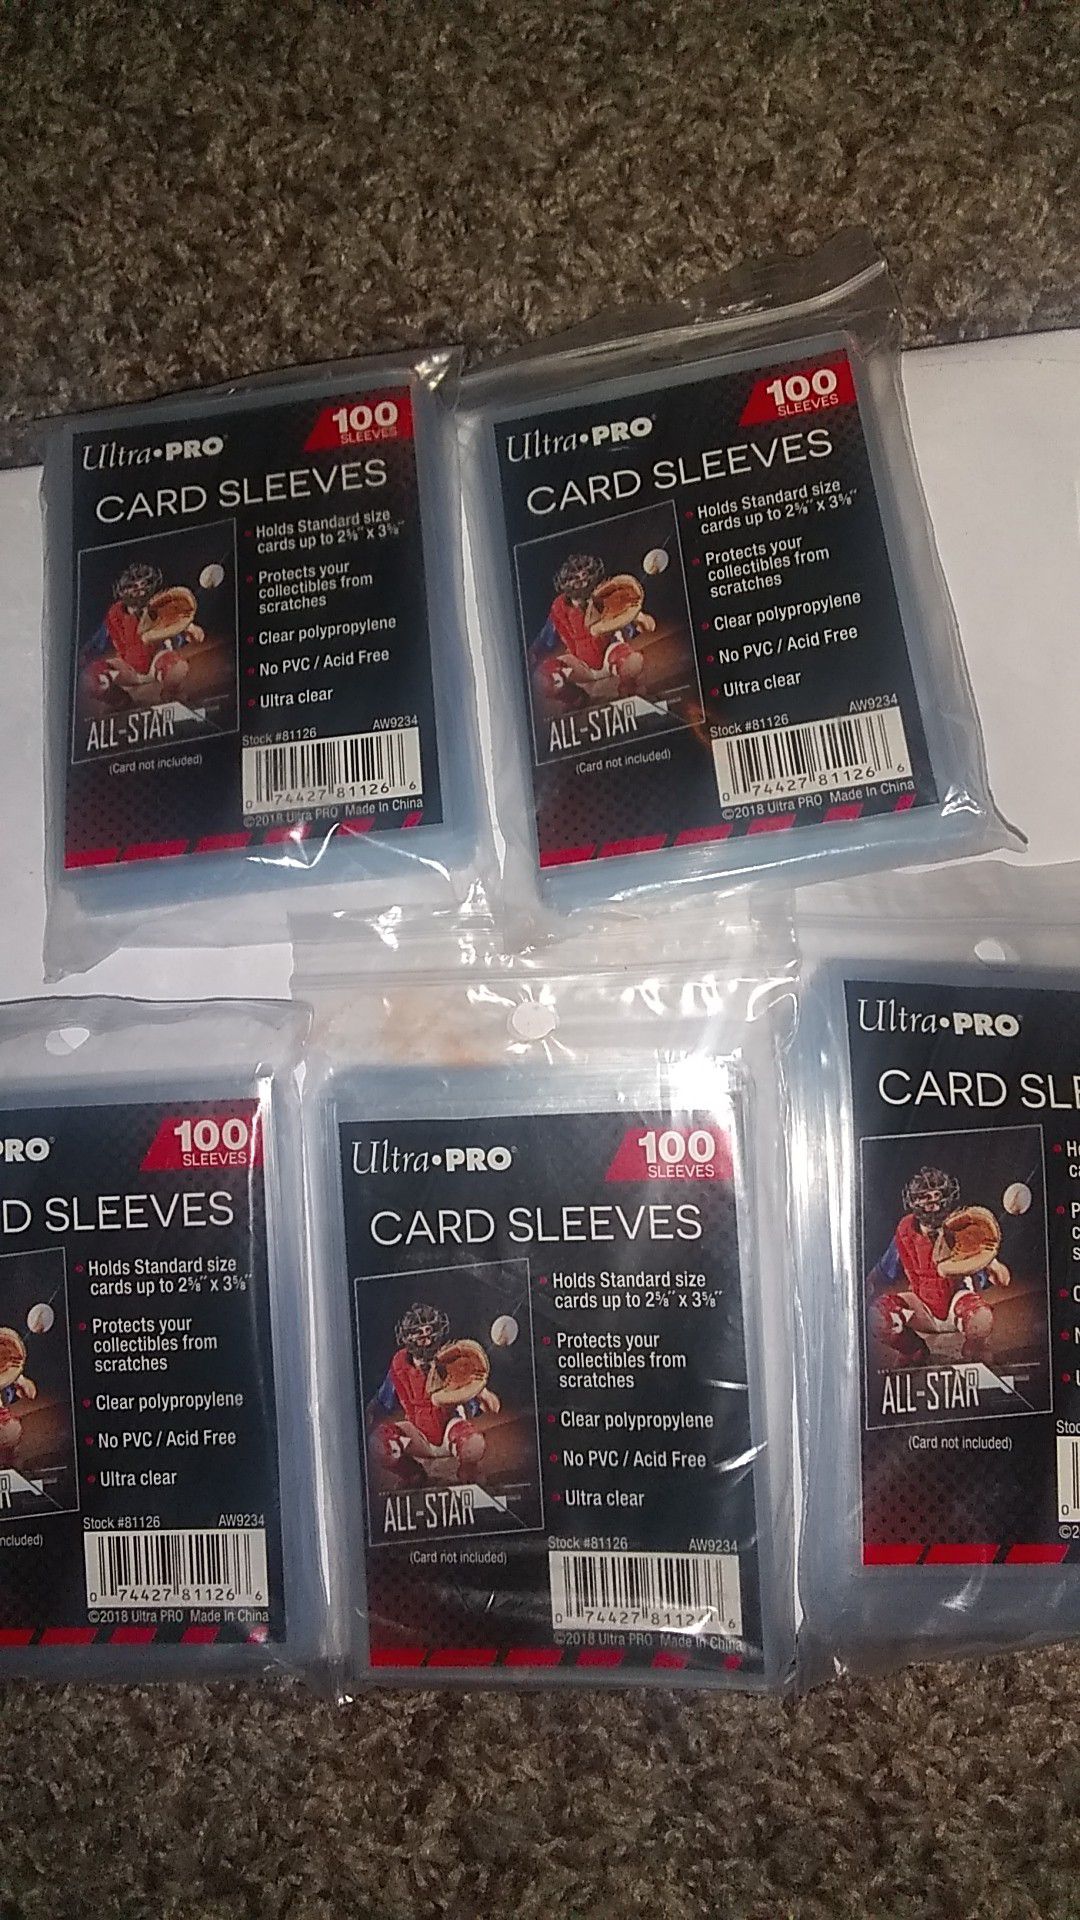 Ultra pro card sleeves 100 per pack